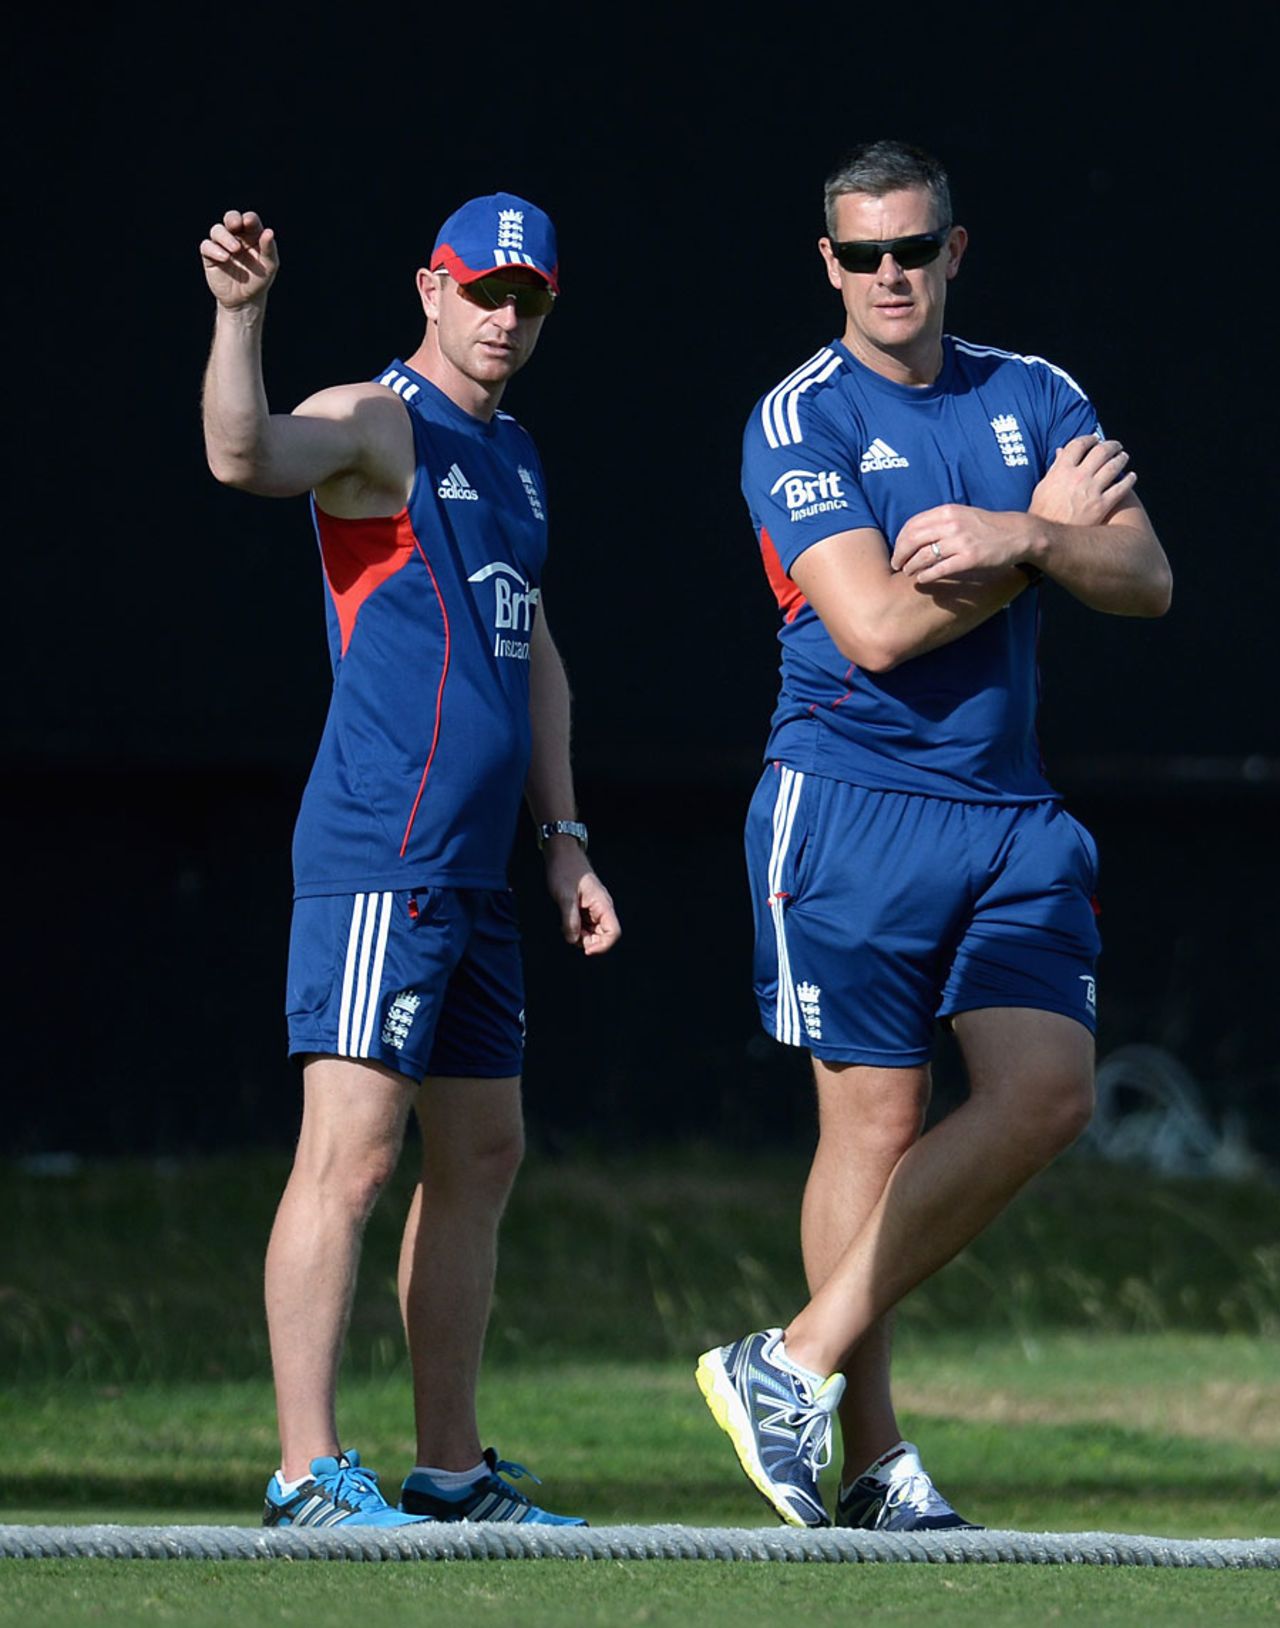 Ashley Giles chats with Paul Collingwood, UWI Vice Chancellor's XI v England XI, Tour match, North Sound, February 25, 2014